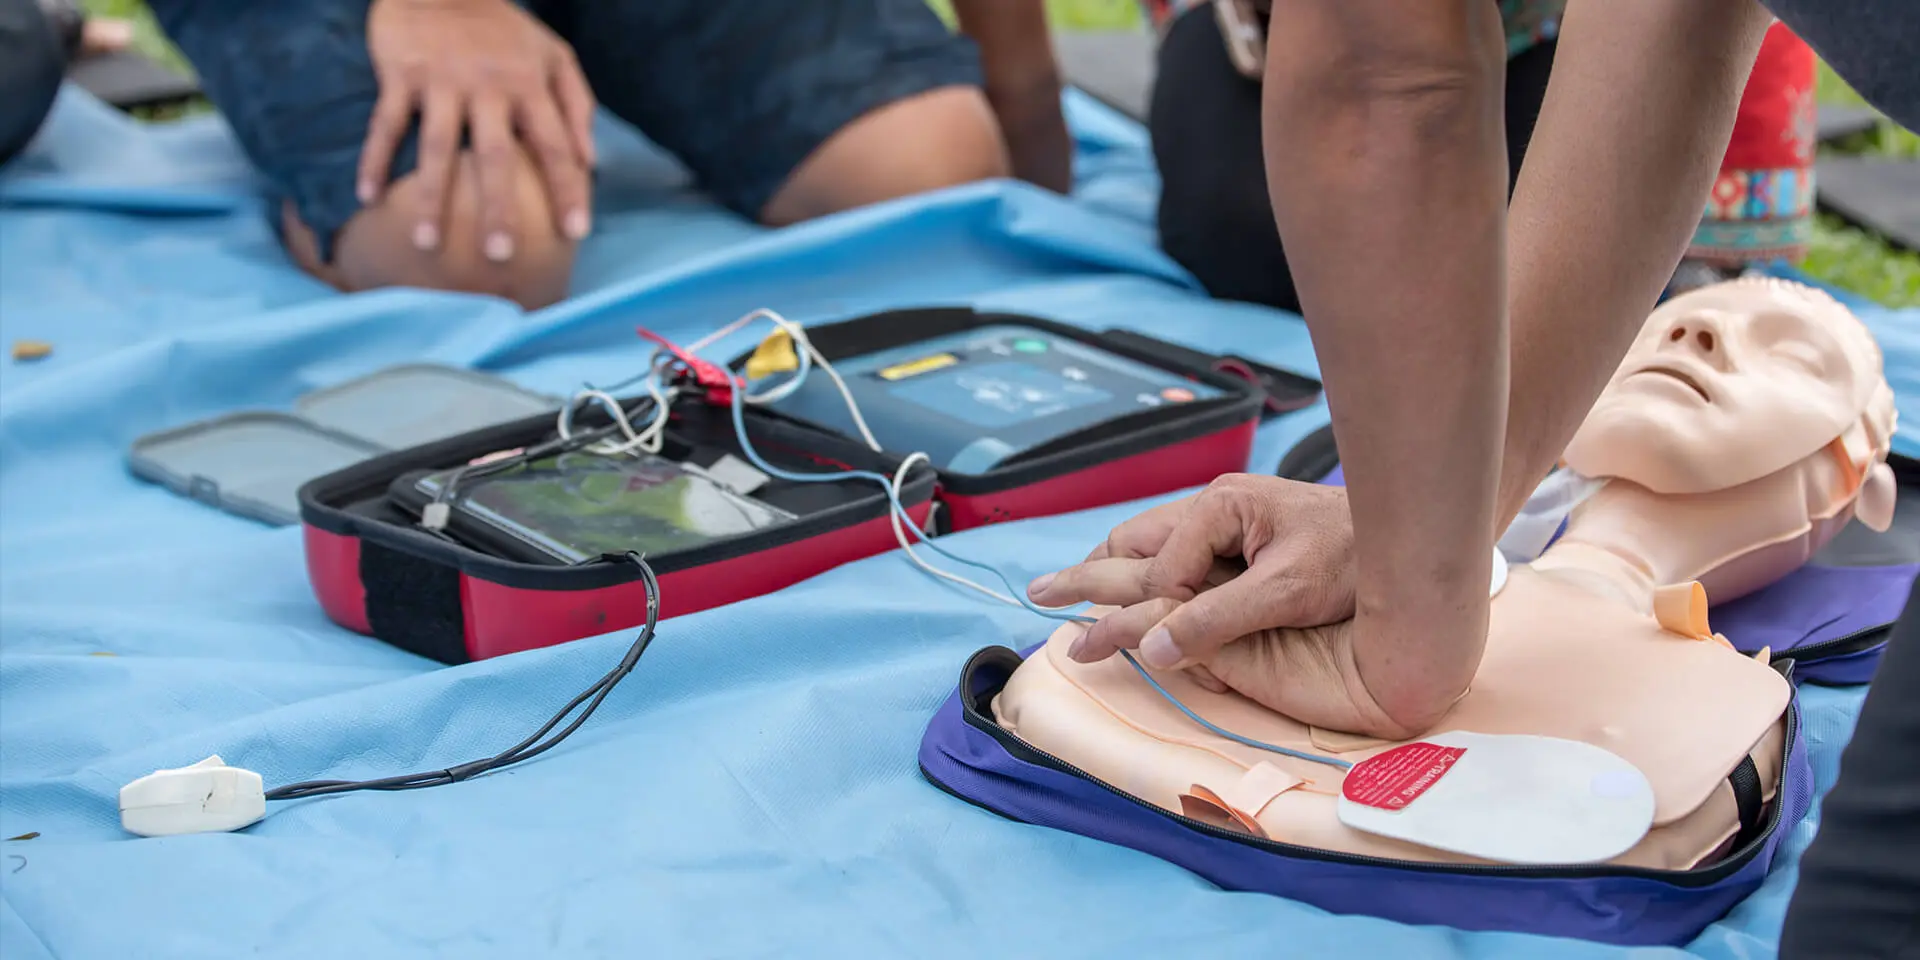 CPR and first aid training using automated external defibrillator device